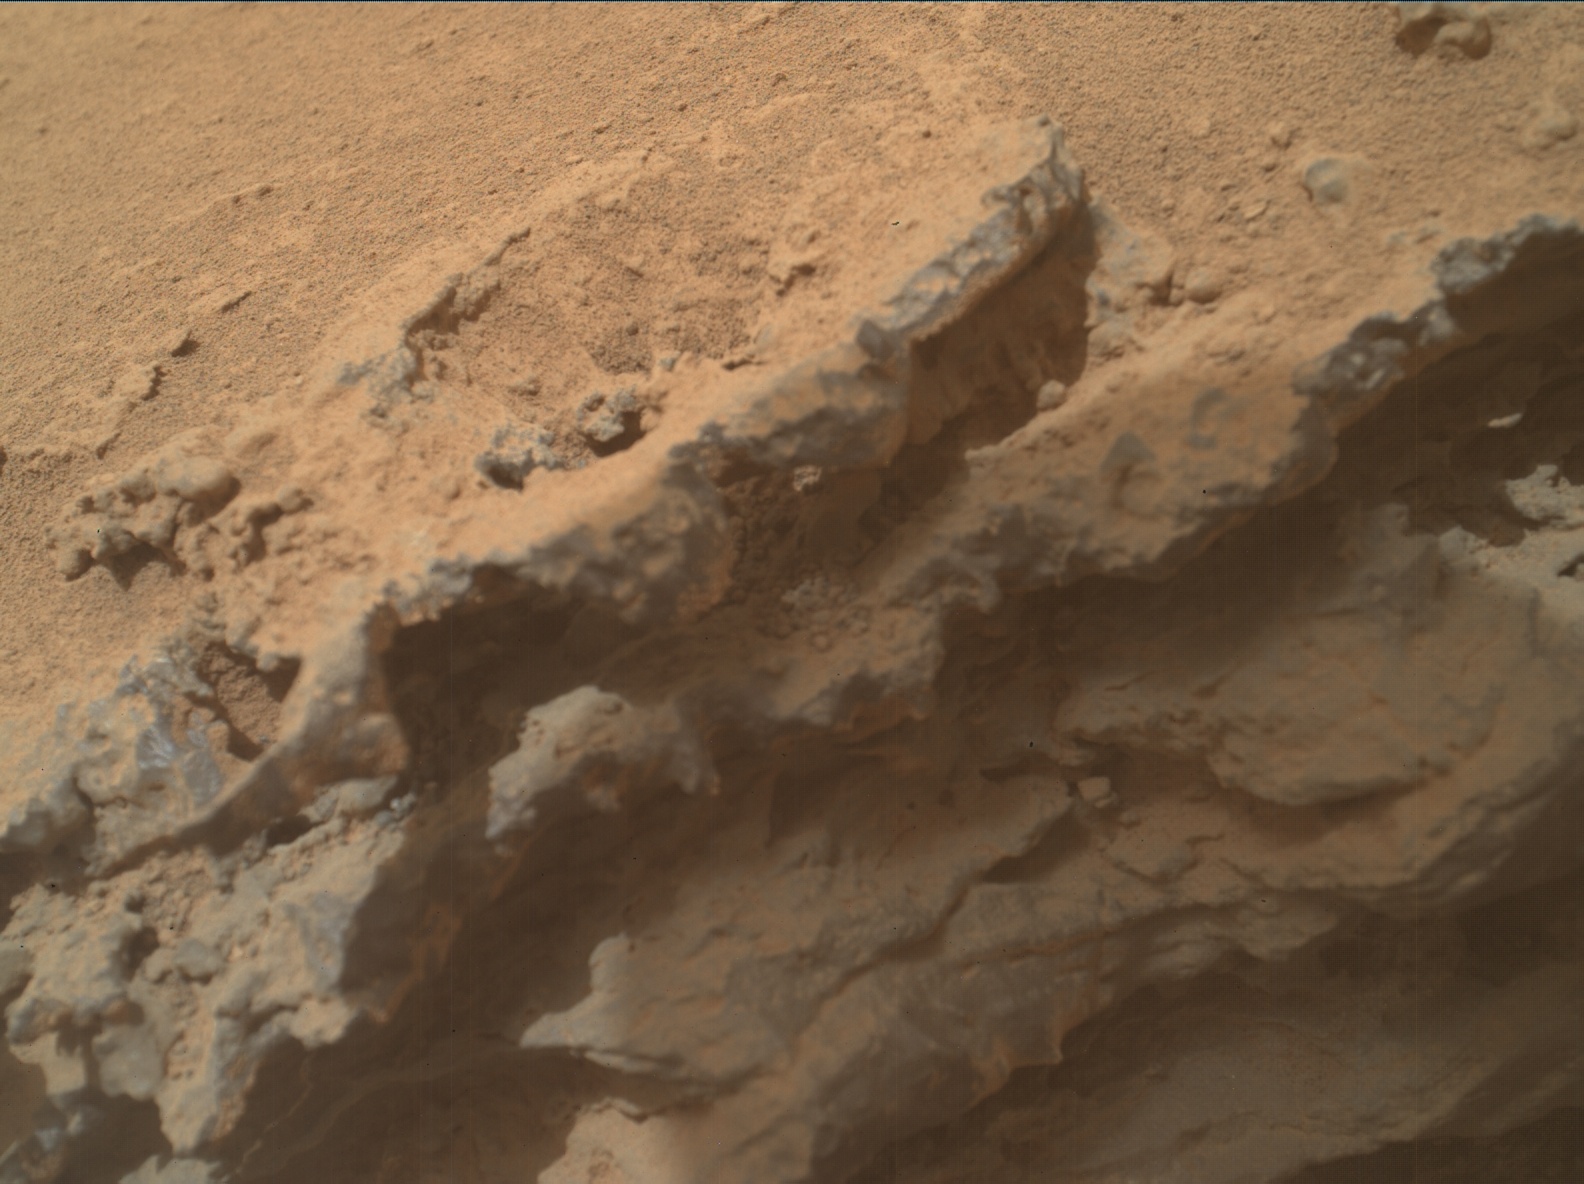 Nasa's Mars rover Curiosity acquired this image using its Mars Hand Lens Imager (MAHLI) on Sol 3644